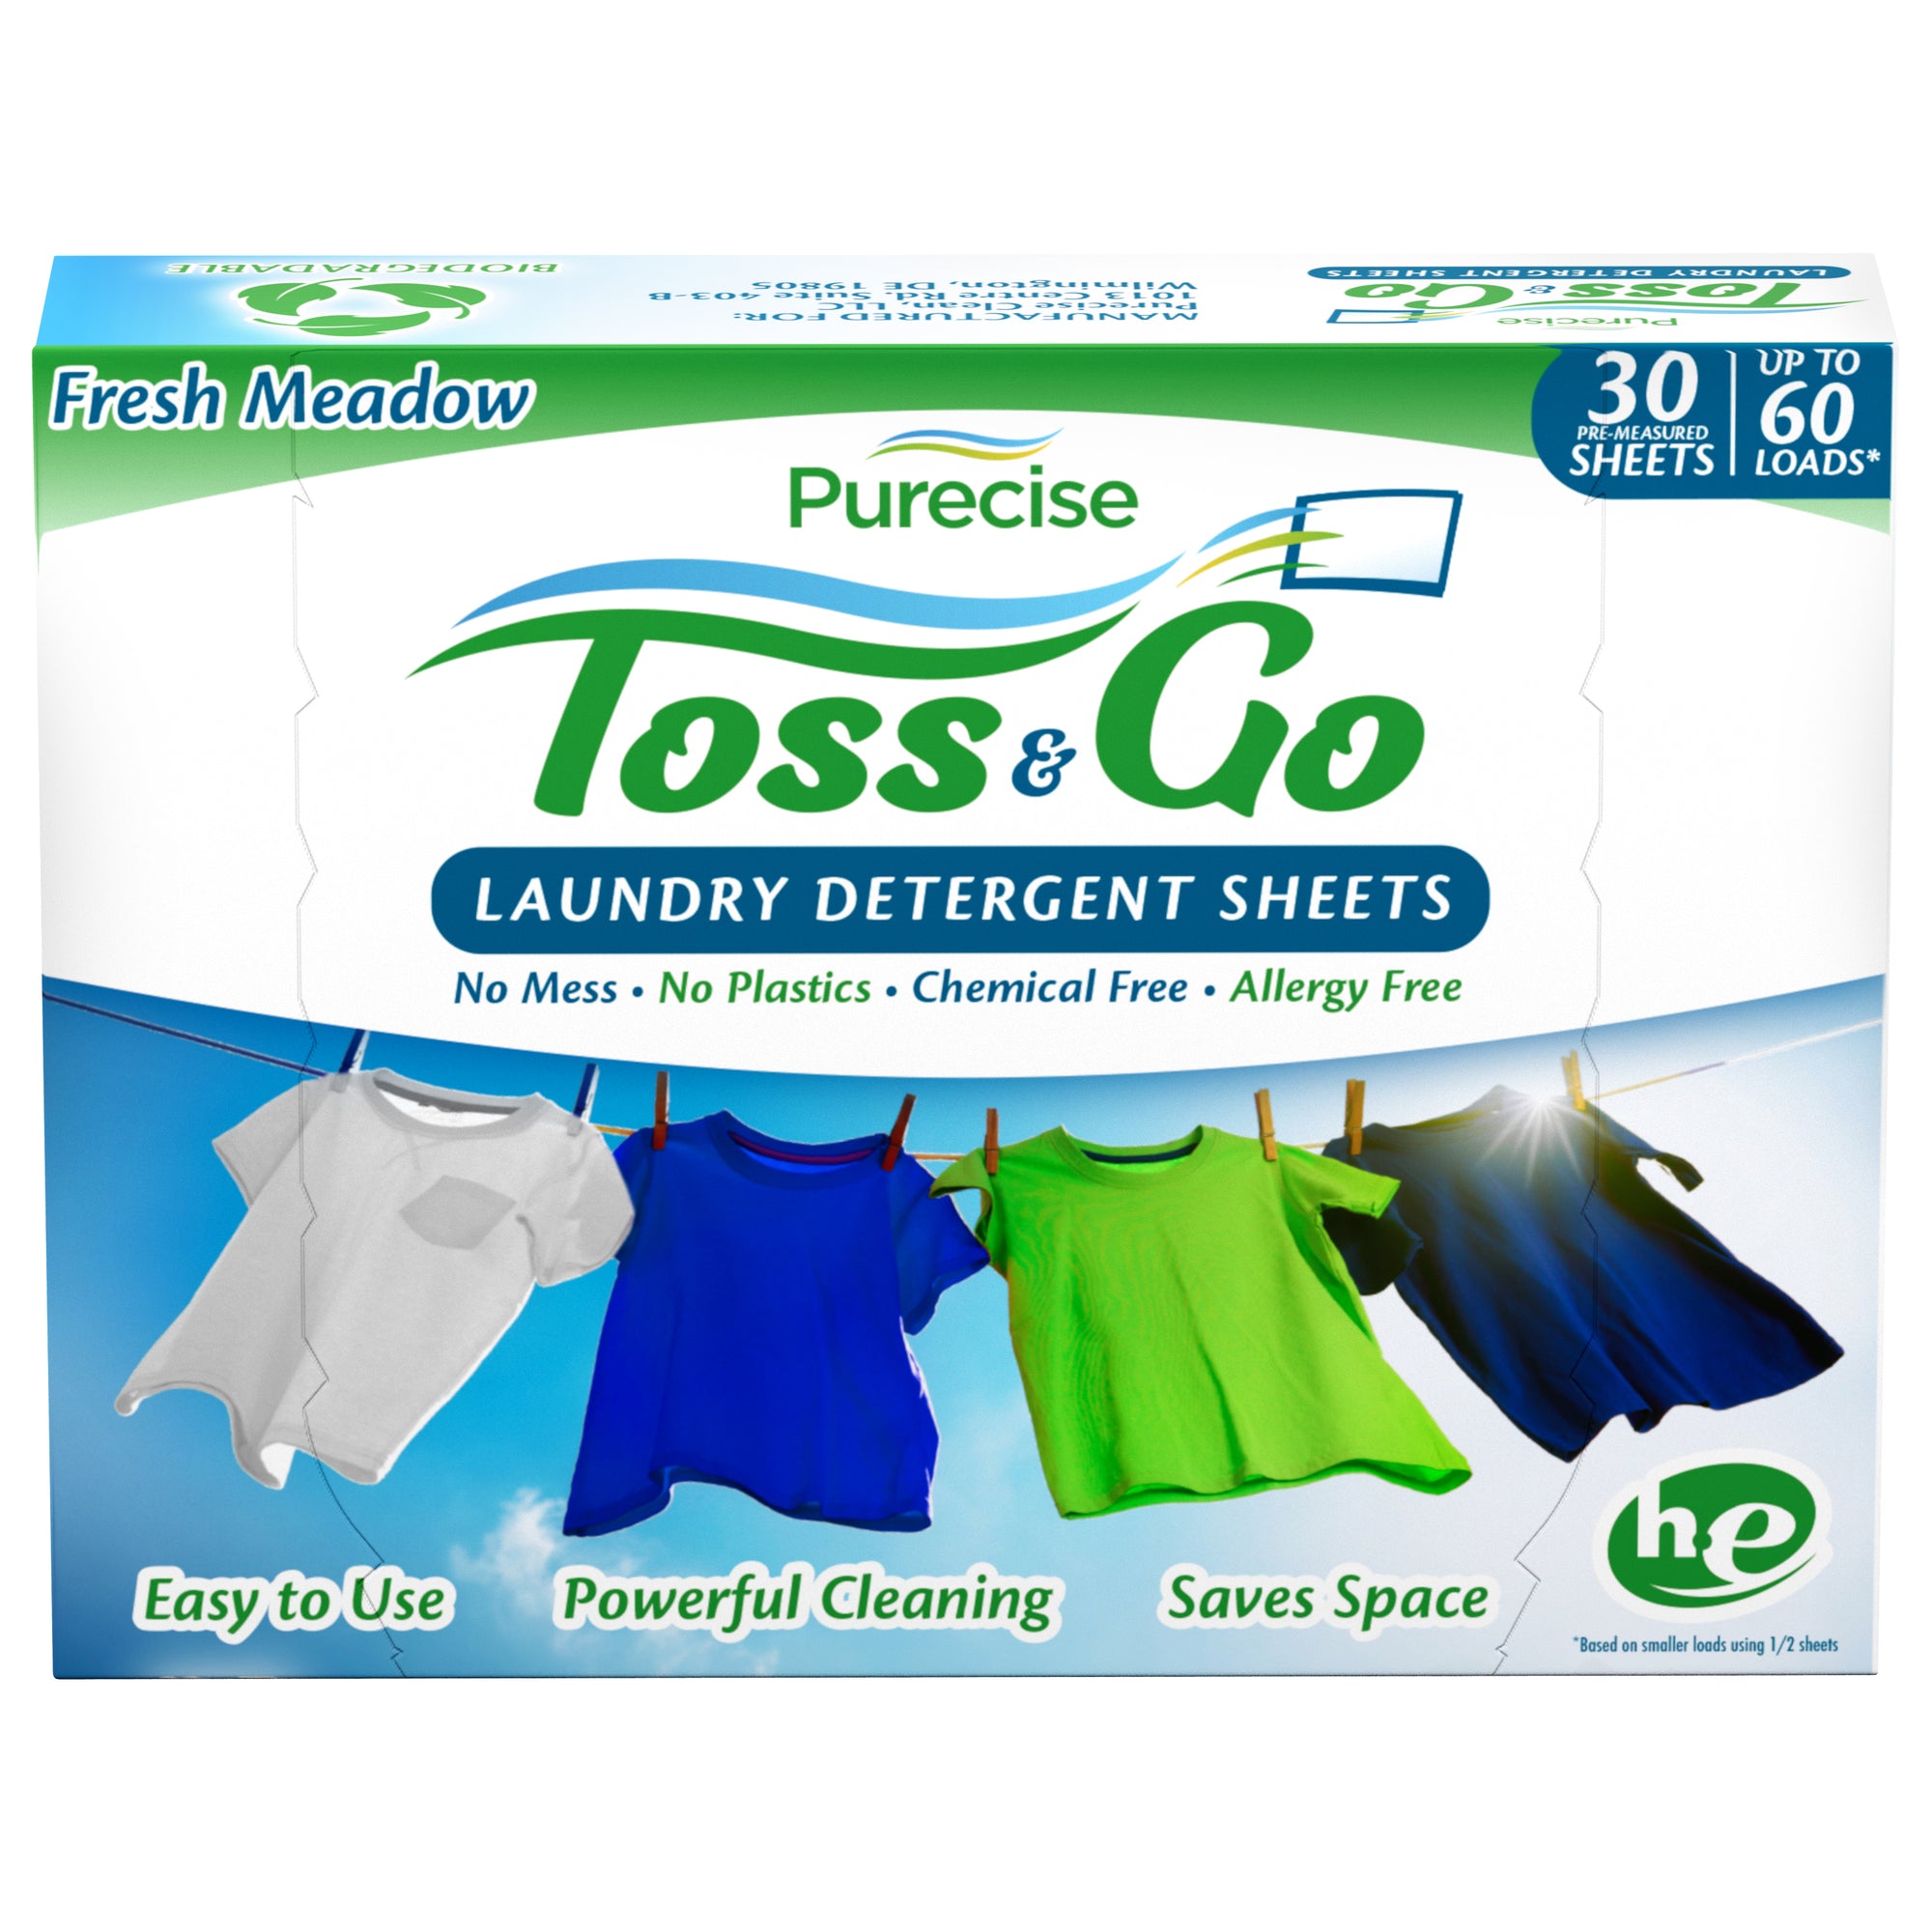 Toss & Go Laundry Detergent Sheets Box by Purecsie